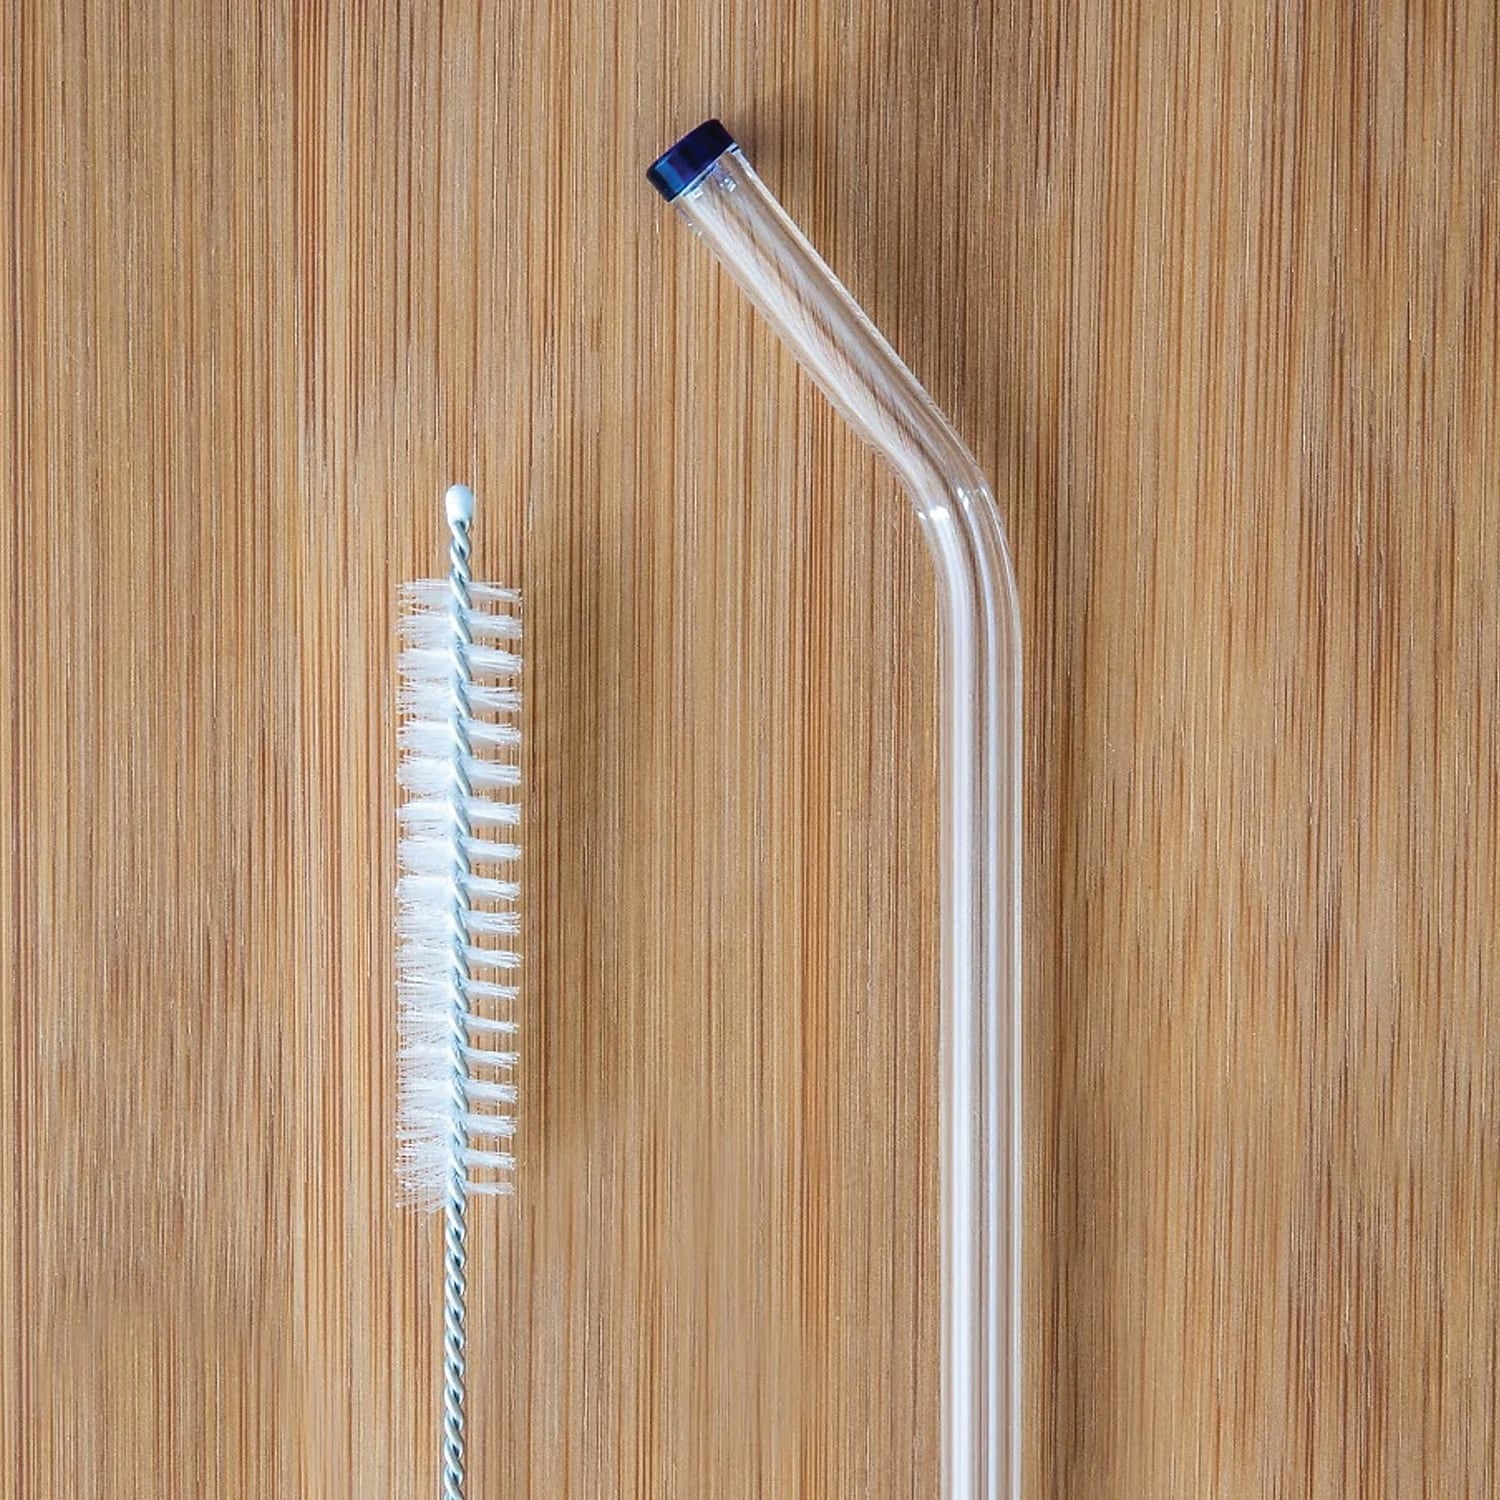 Hosuly 36 Pcs Curved Glass Reusable Straws with 12 Cleaning Brushes 8 x 8  mm Bent Glass Straw Clear Drinking Travel Straw Glass Drinking Straws Glass